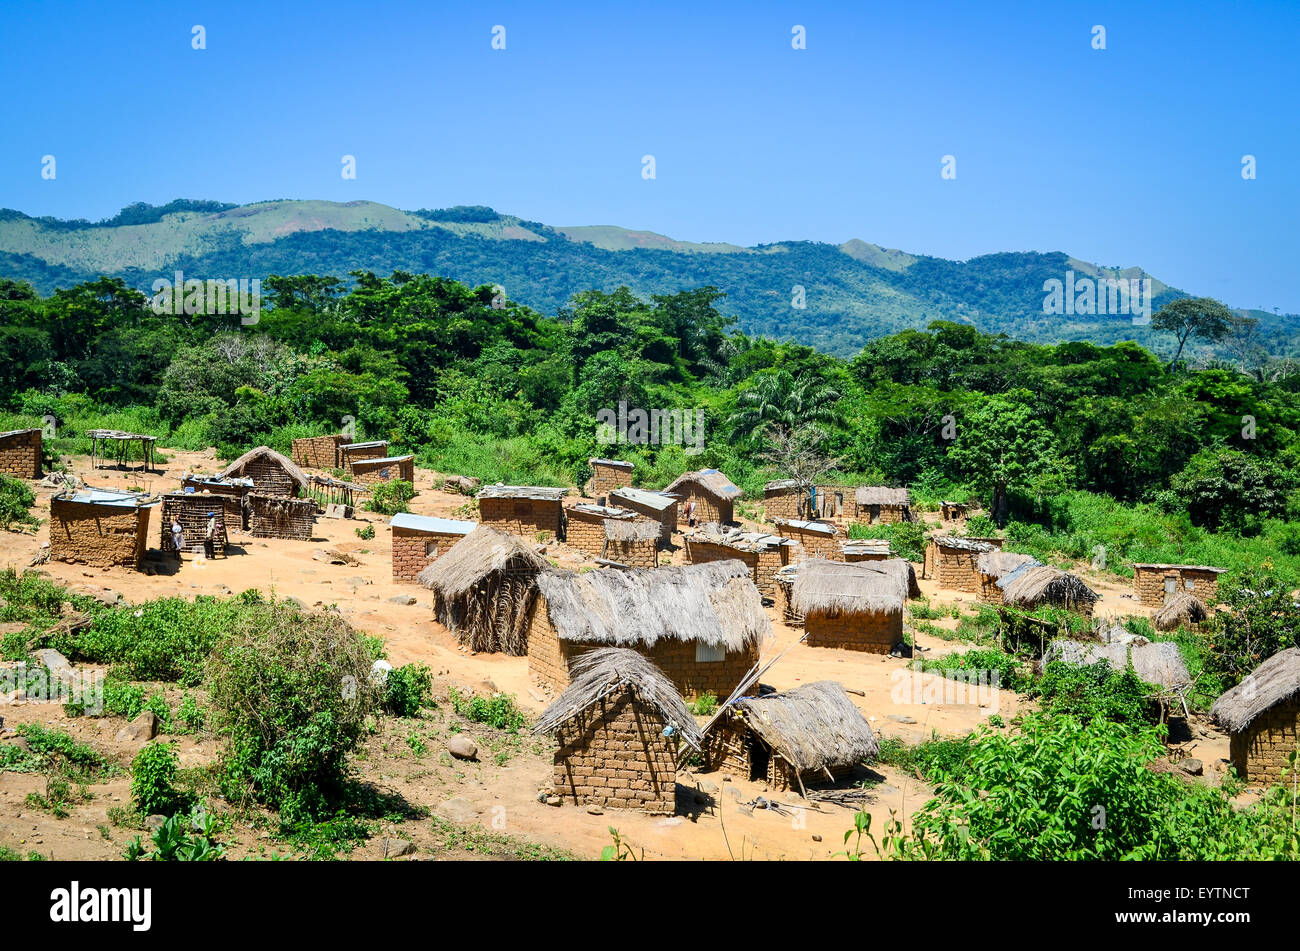 Villages of Angola in the countryside, with mud houses and thatched roofs Stock Photo